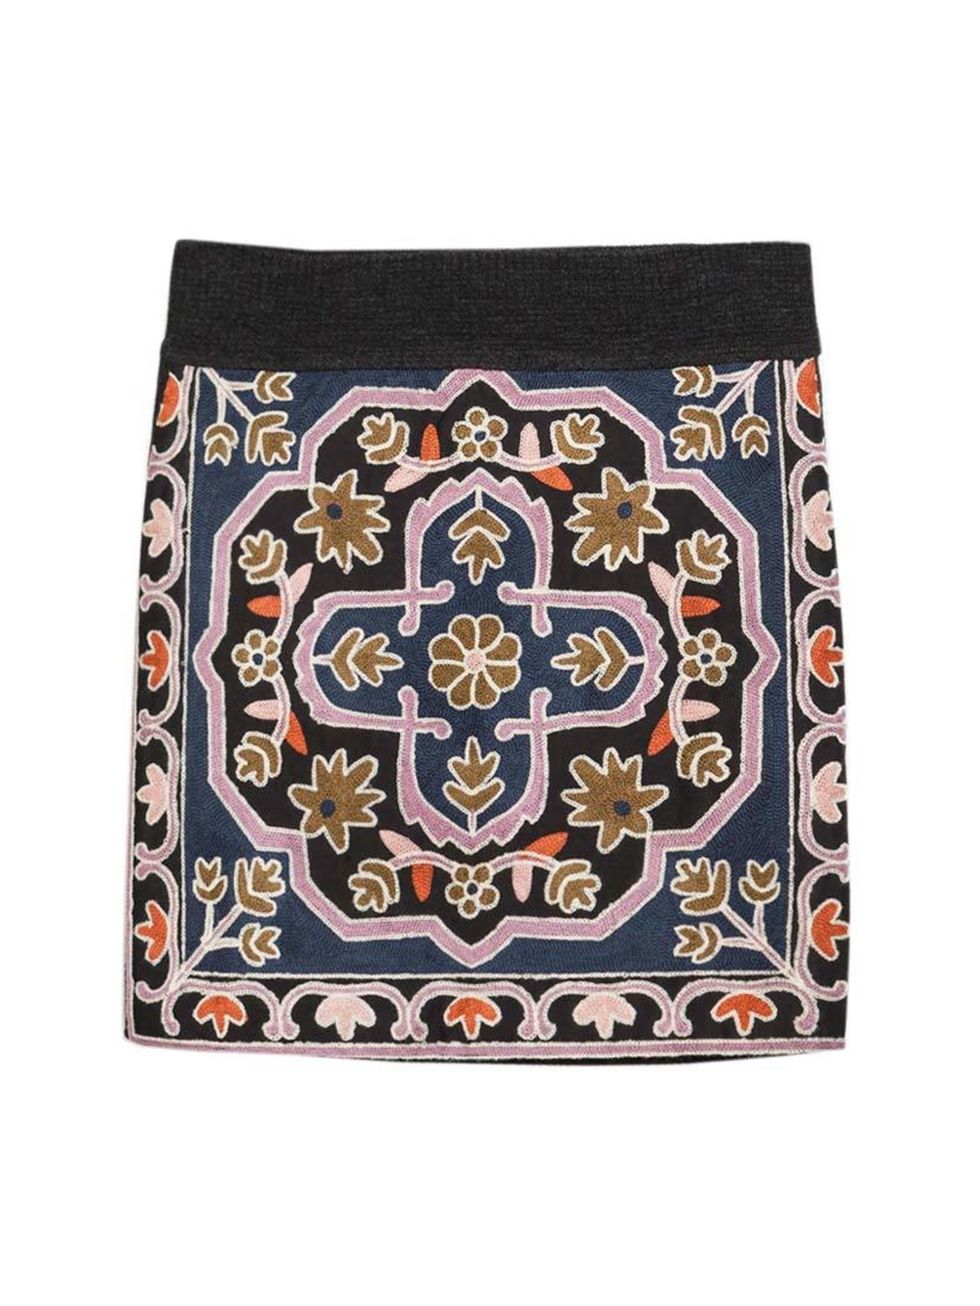 <p>Acting Commissioning Editor Georgia Simmonds will pair this embroidered skirt with a chunky knit and black opaques.</p>

<p><a href="http://www.zara.com/uk/en/woman/skirts/embroidered-geometric-knit-skirt-c269188p2336545.html" target="_blank">Zara</a> 